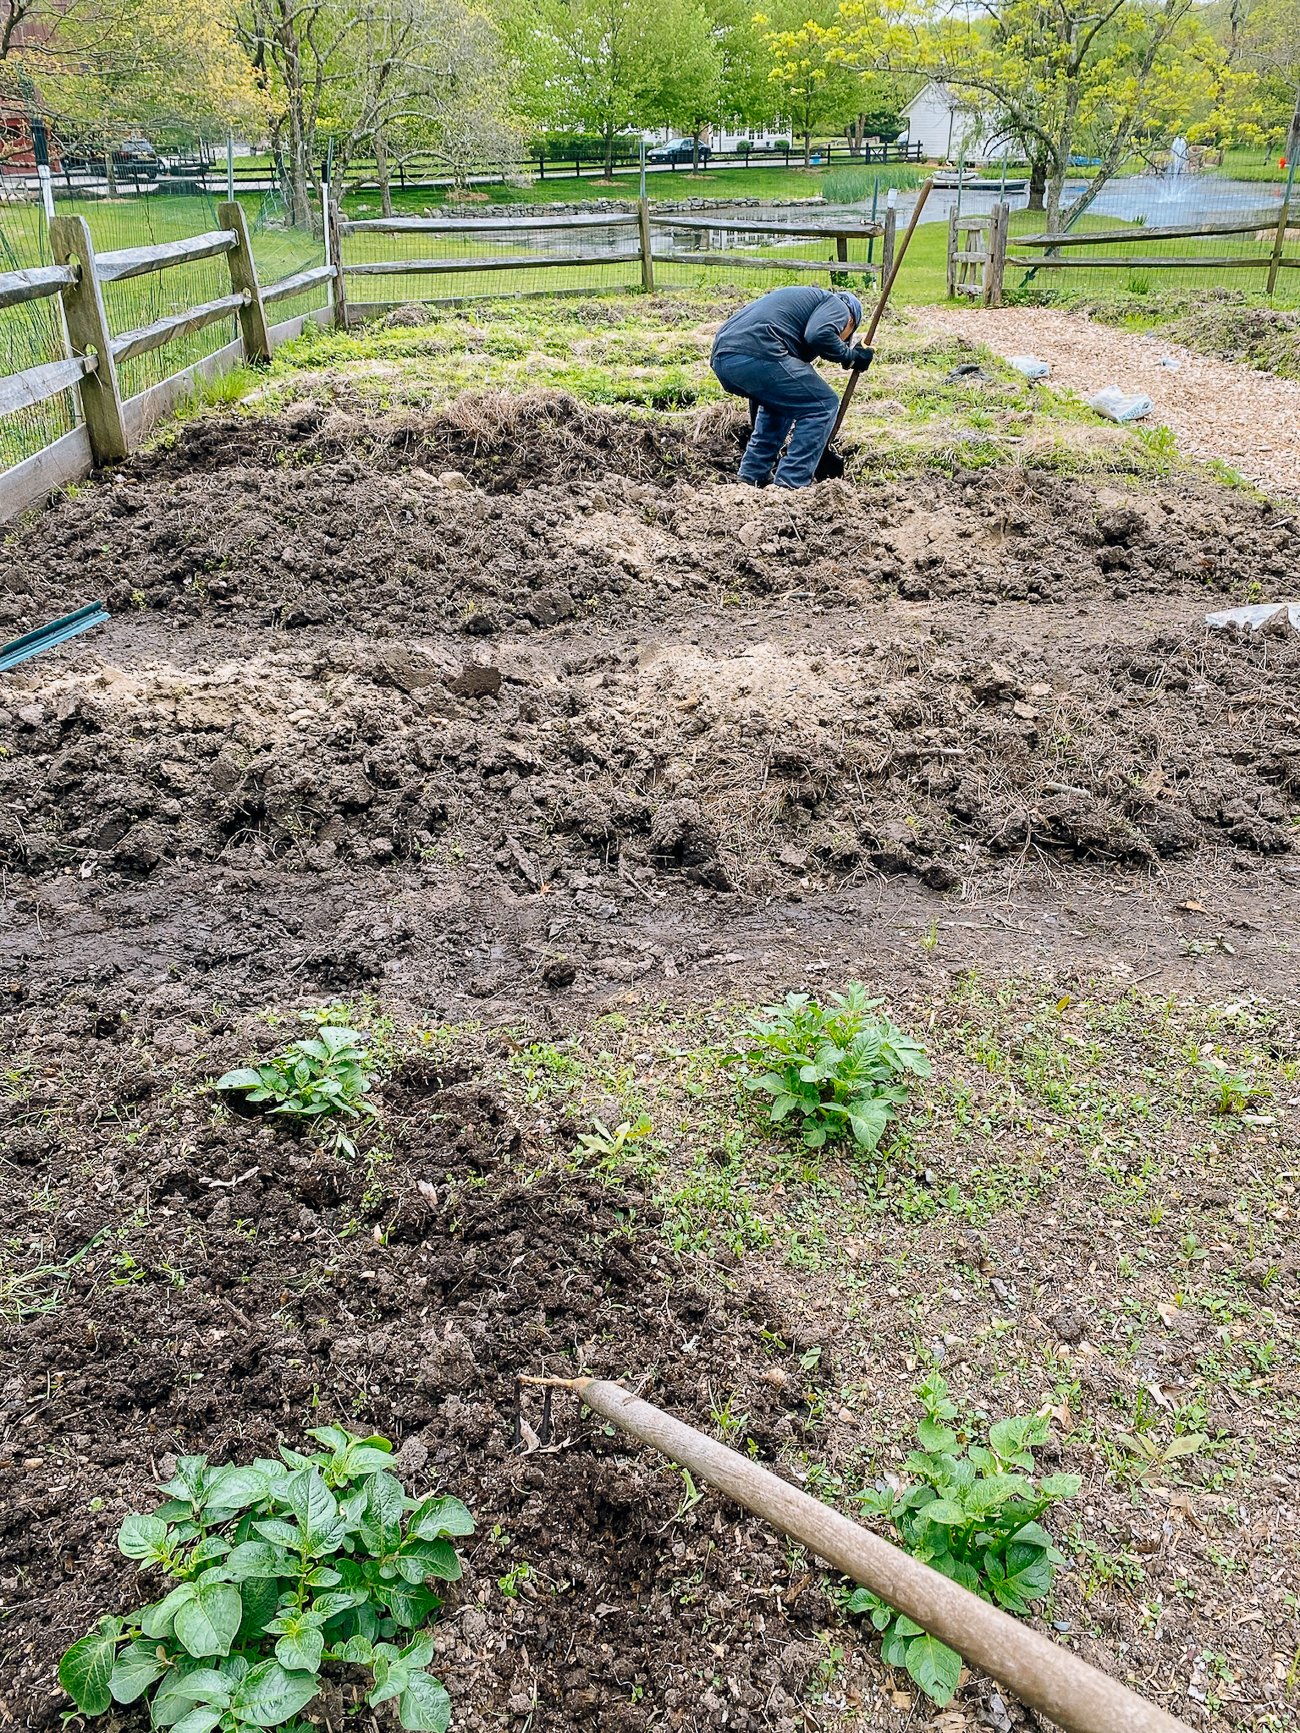 Clearing out weeds in garden beds